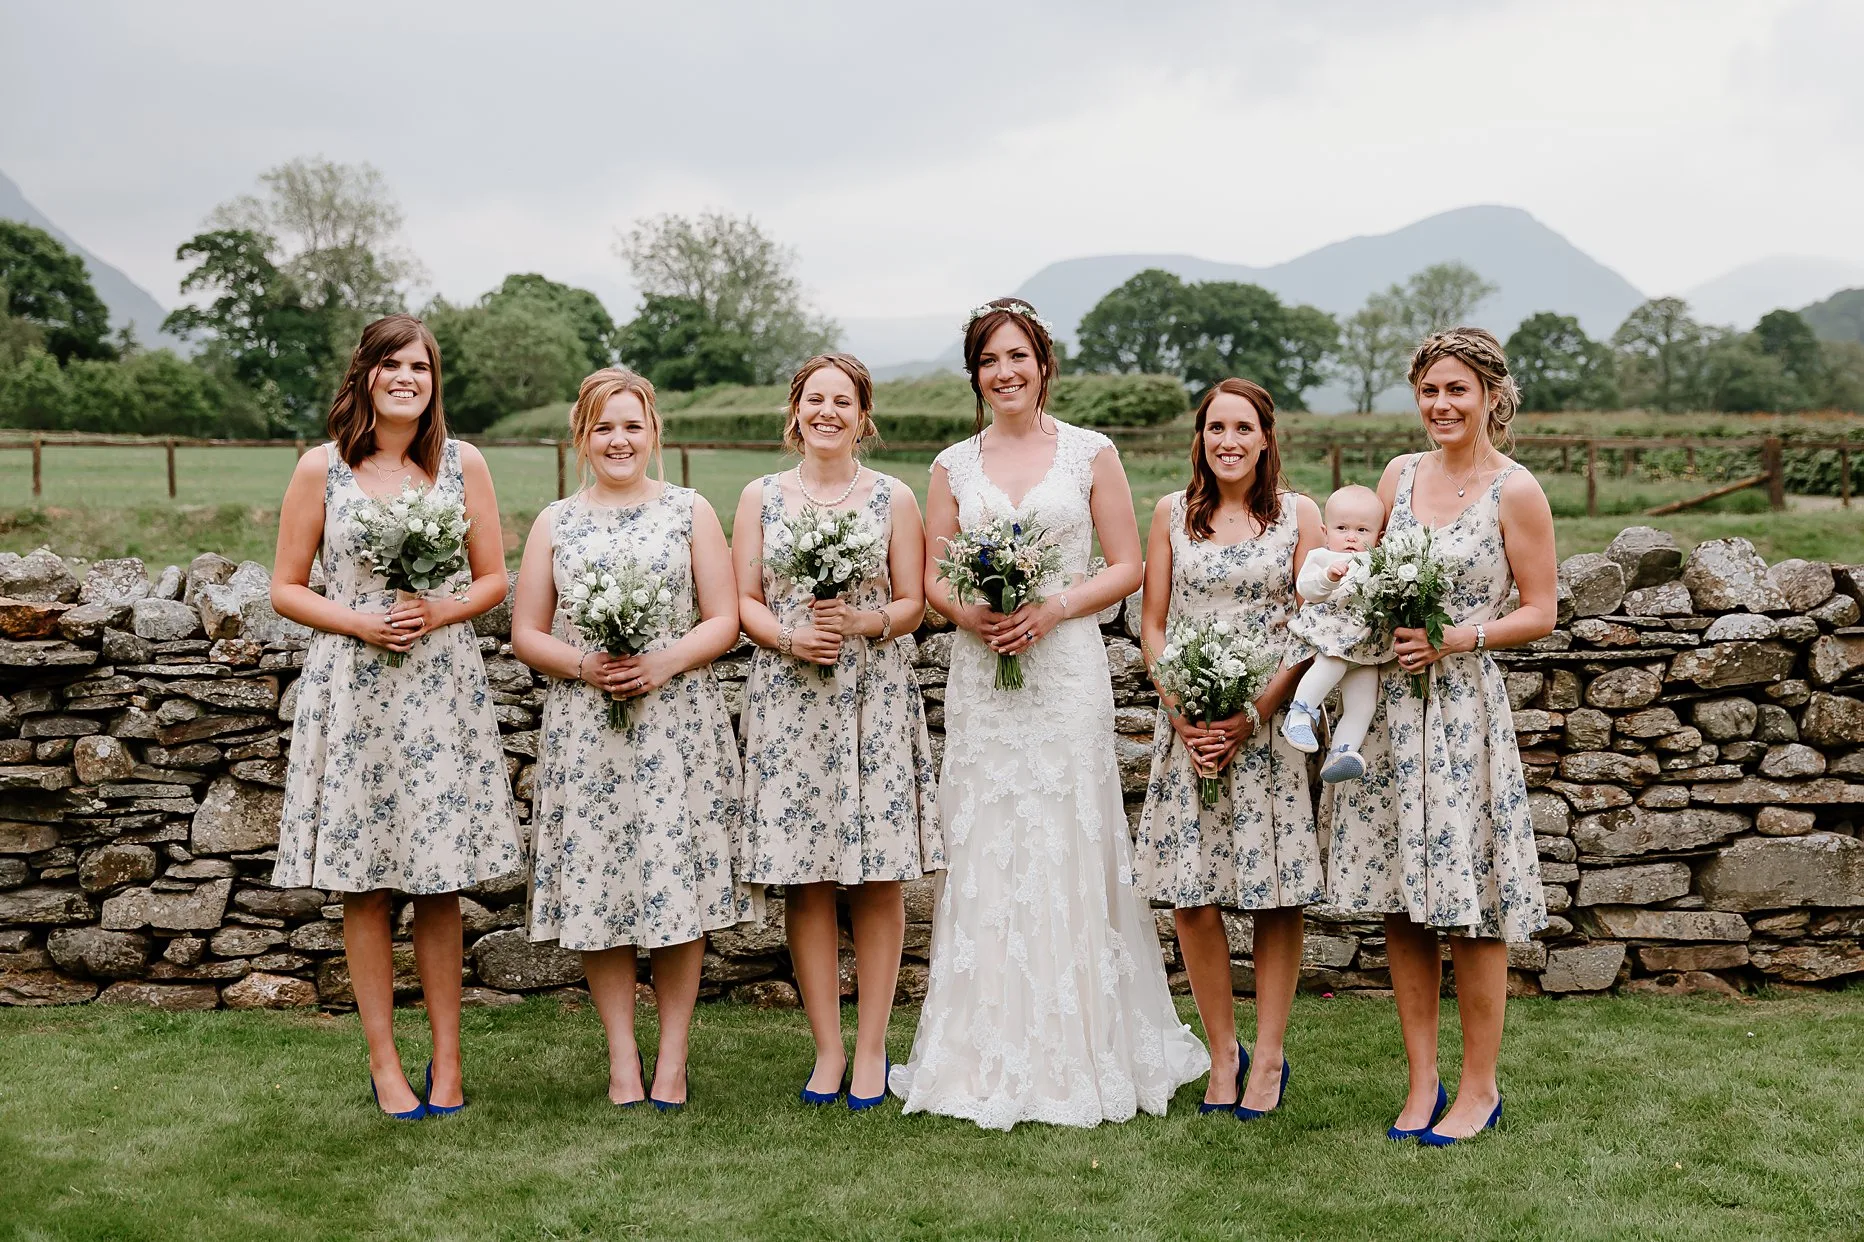 Bride stood with 5 bridesmaids all holding wedding bouquets. Bridesmaids are wearing blue floral dresses and cobalt blue shoes.